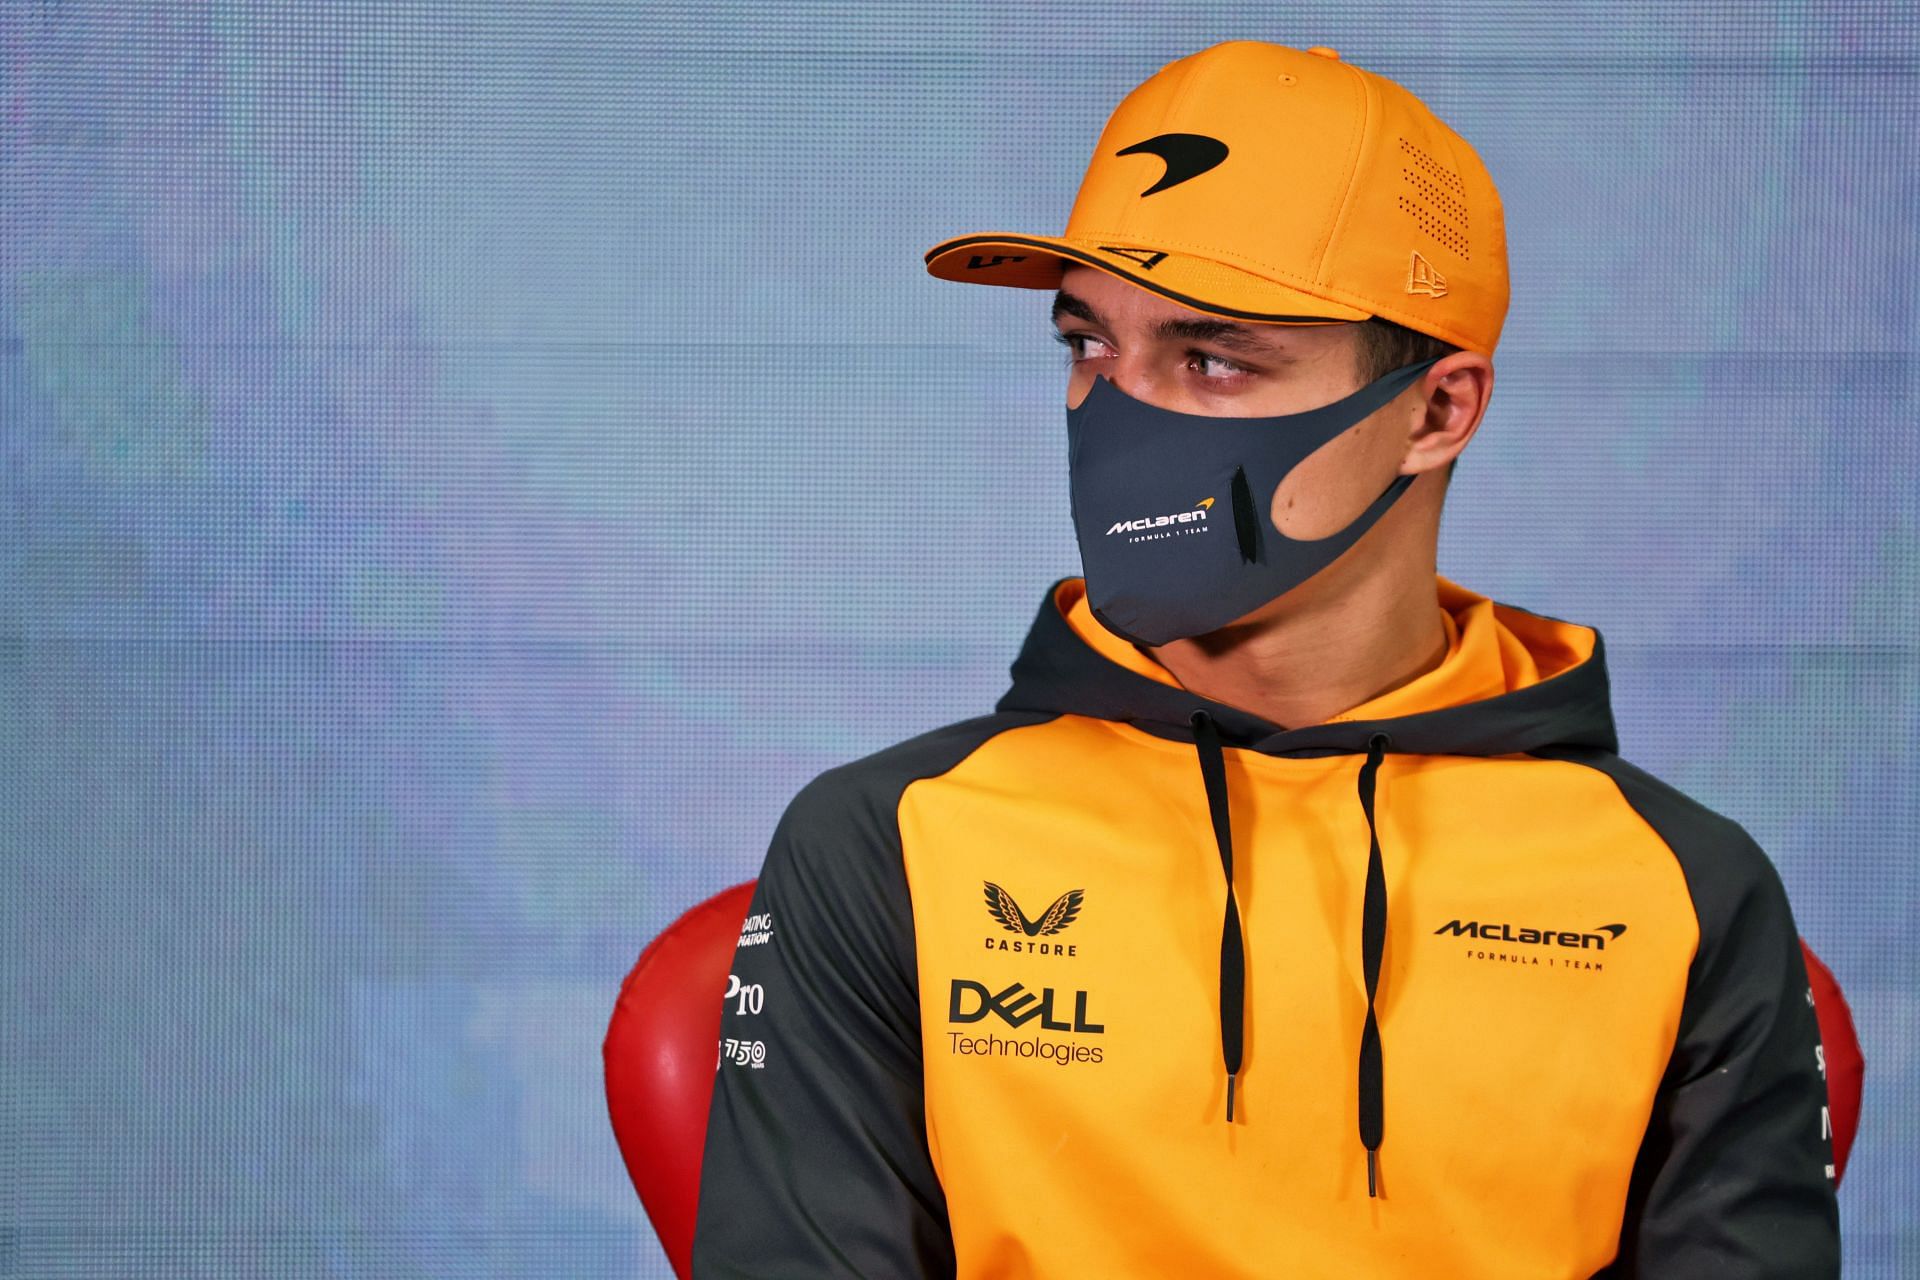 Lando Norris attends a press conference on Day 3 of Formula 1 Testing in Barcelona